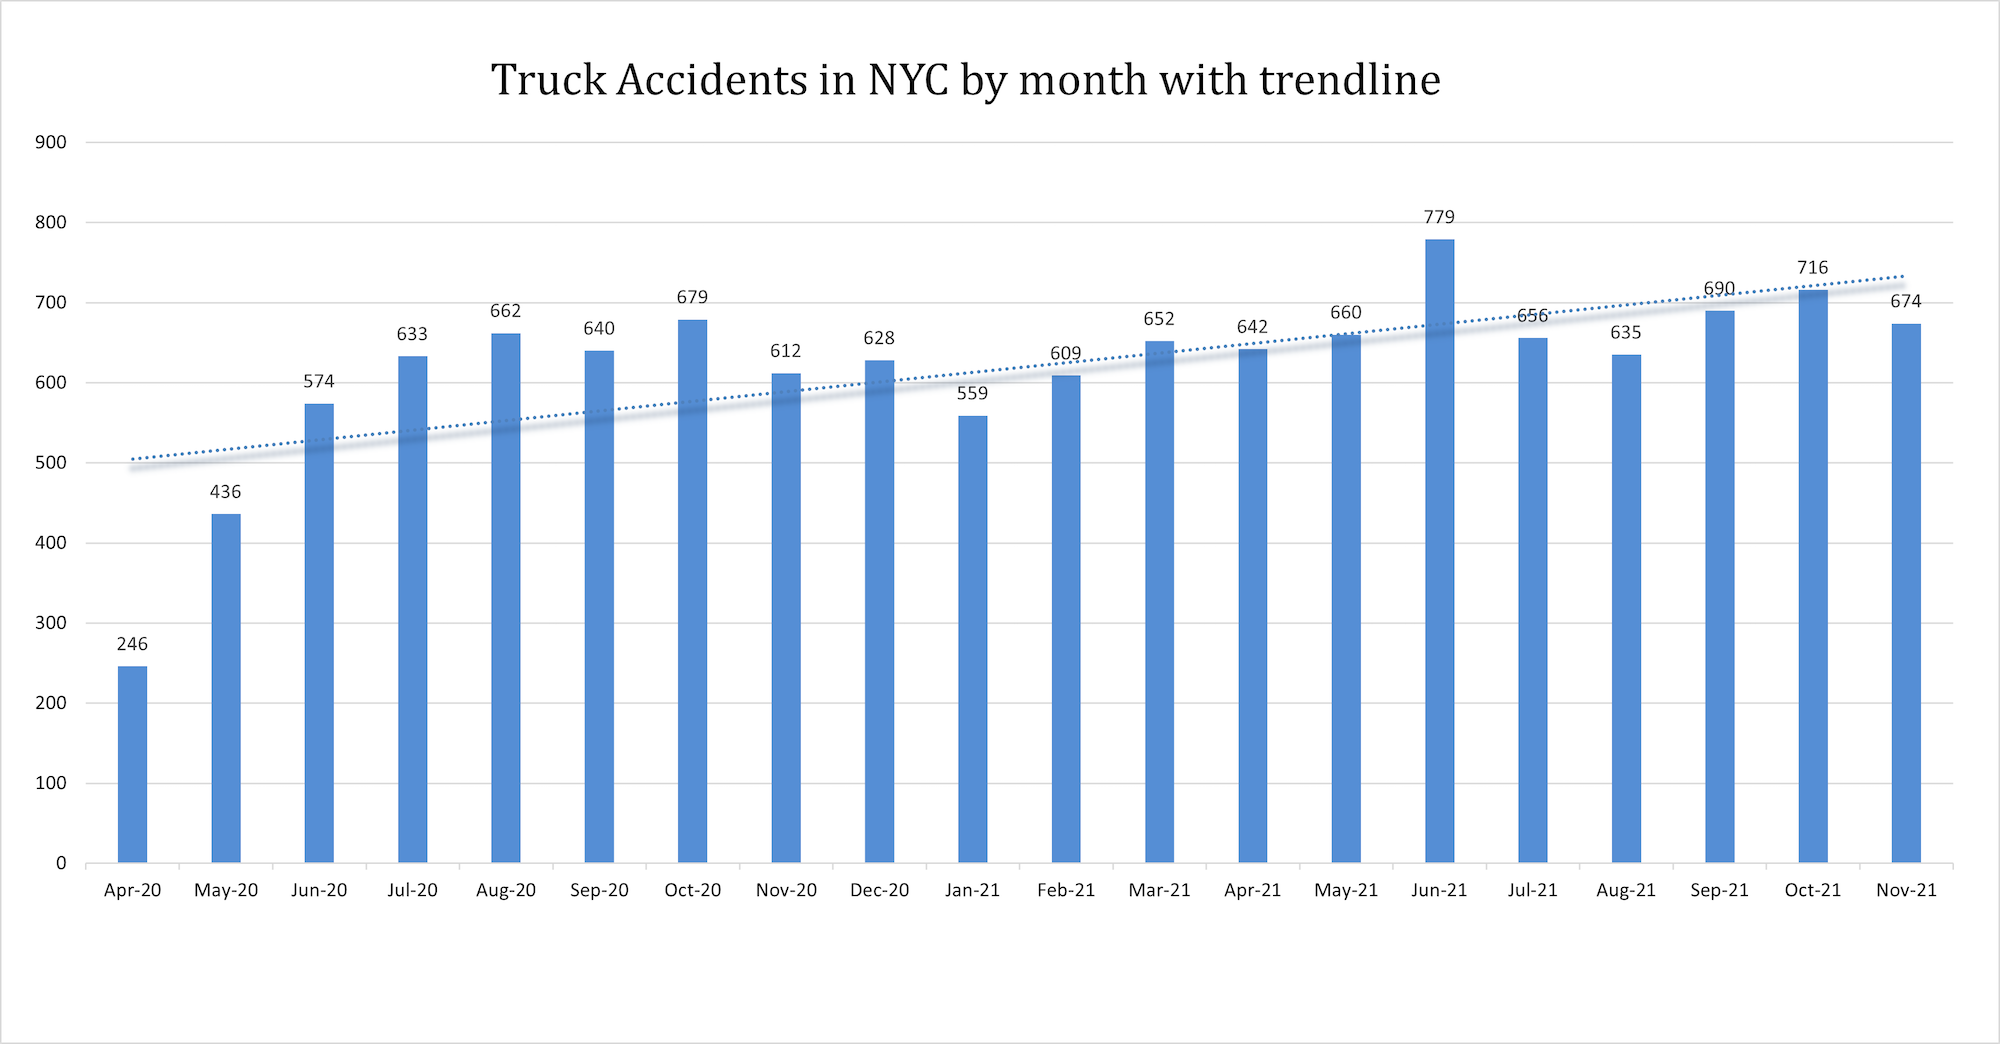 Truck Accidents in NYC by month with trendline